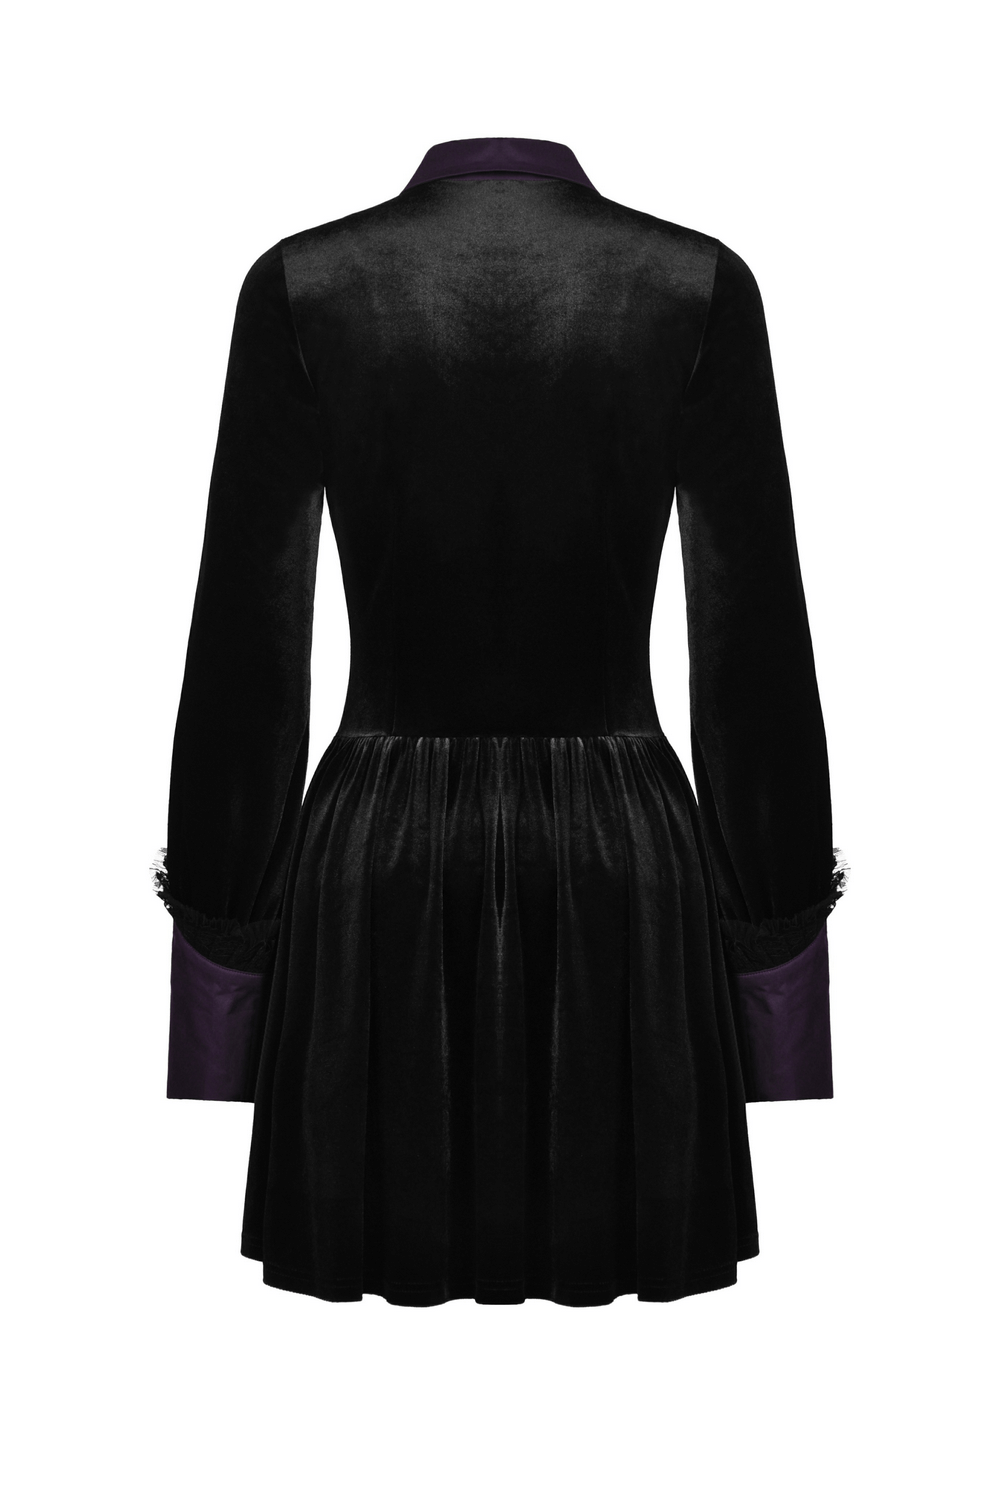 Black Velvet Batwing Collar Gothic Dress with Lace Cuffs